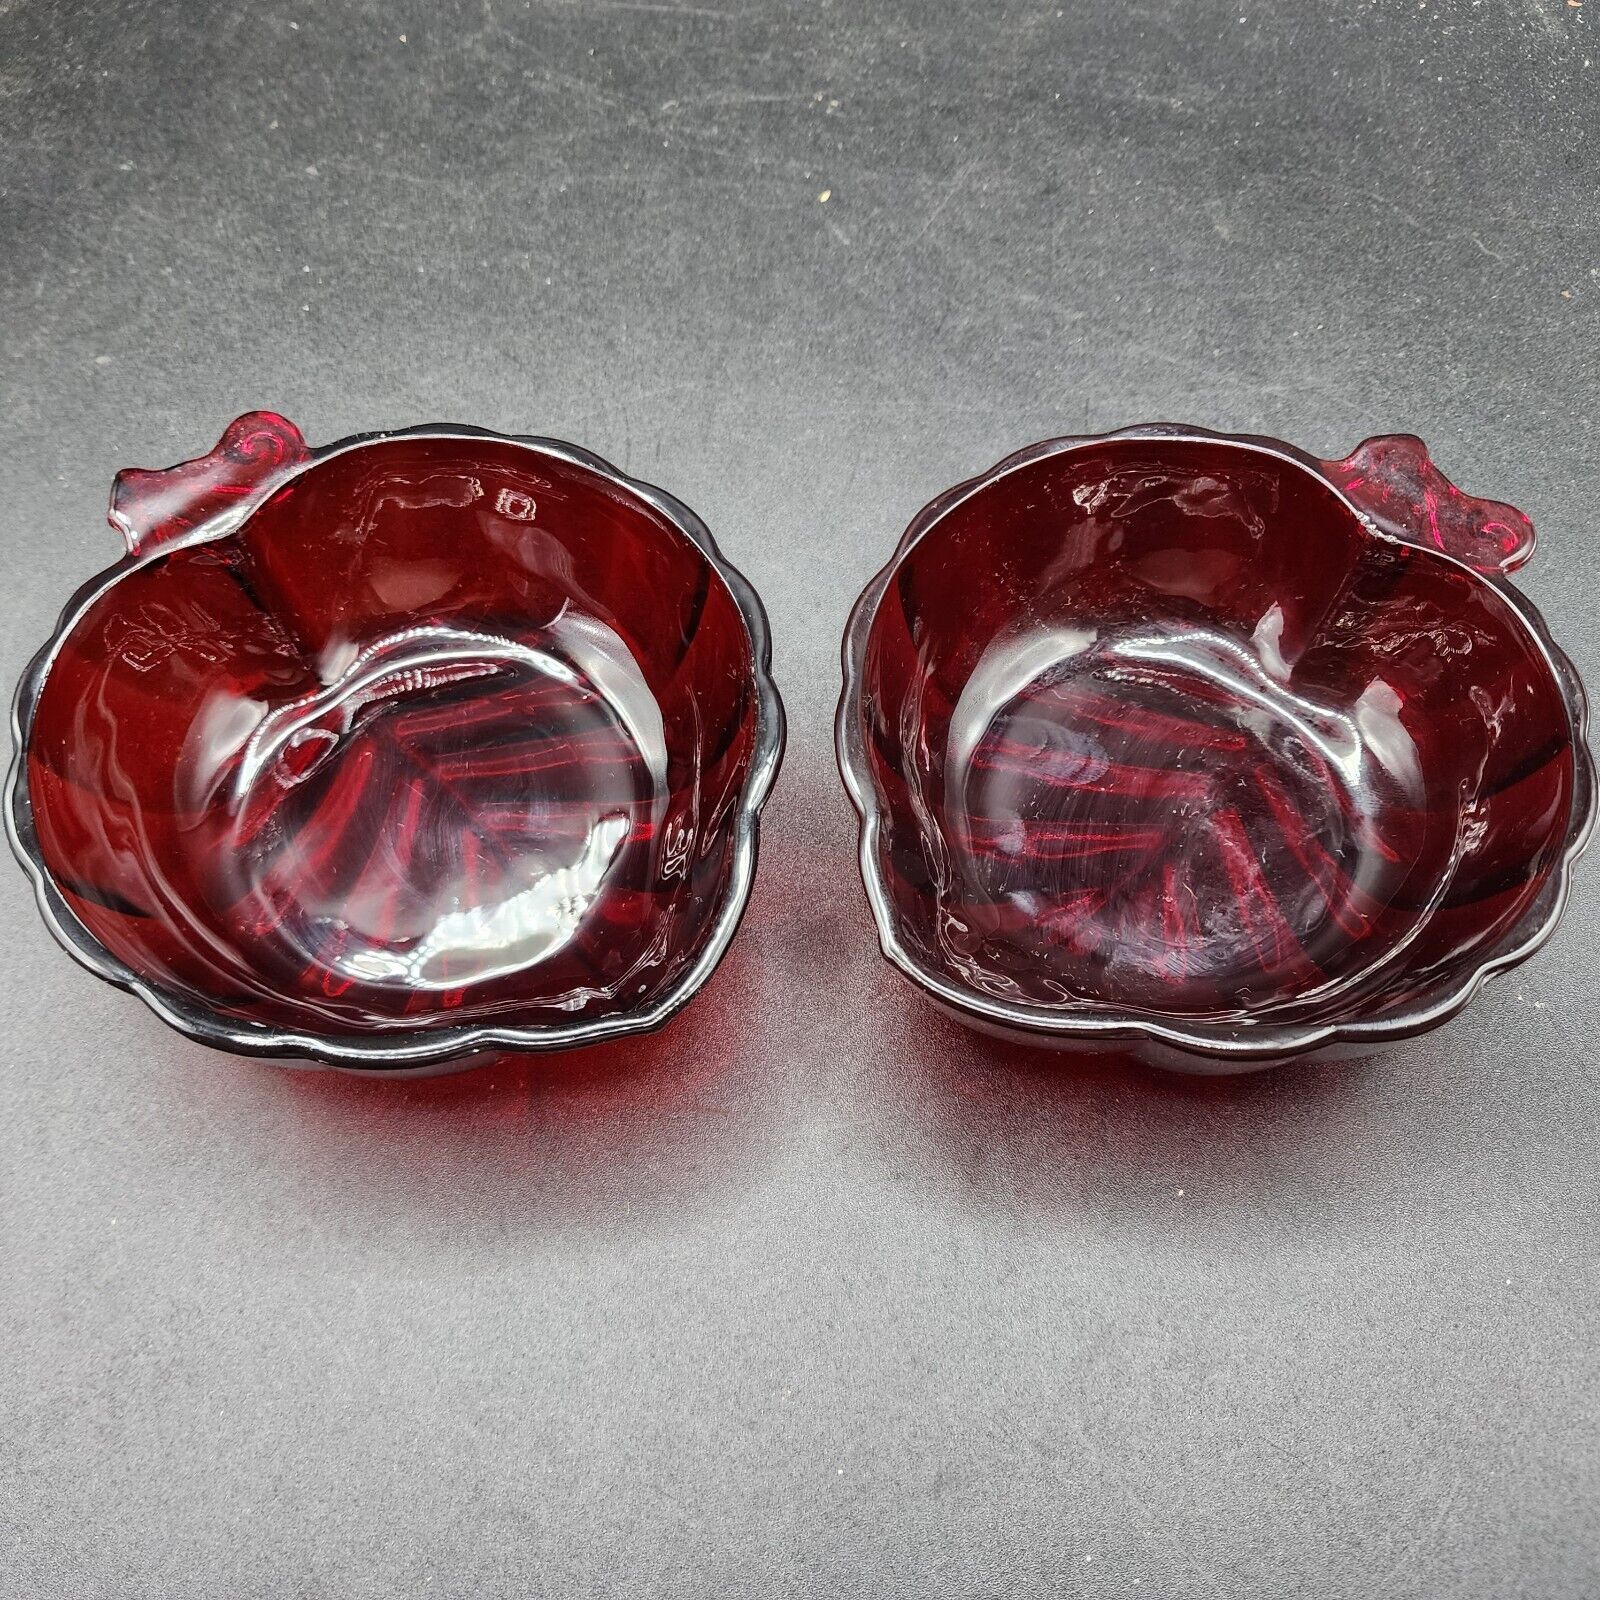 Primary image for Ruby Red Glass Bowls Royal Leaf Shaped Vintage Trinket Candy Dish - Pair Of 2